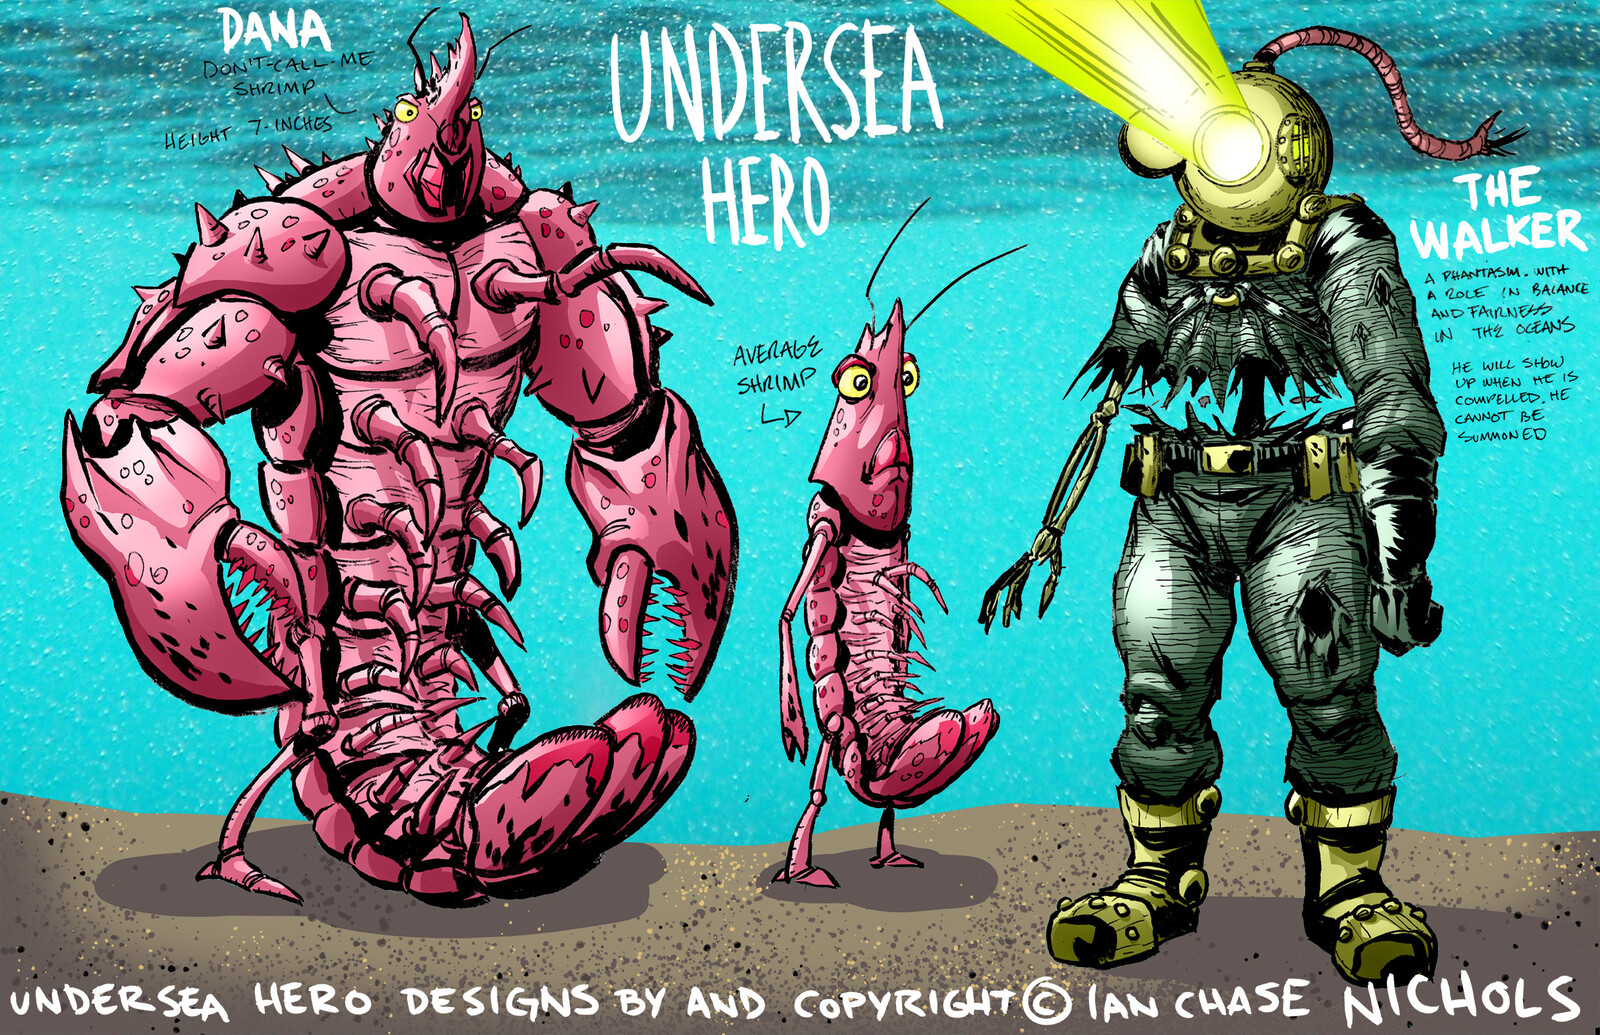 New Undersea Hero characters.
UNDERSEA HERO and all Related Characters are Copyright © and Trademark TM 2022 Ian Chase Nichols. All Rights Reserved.
